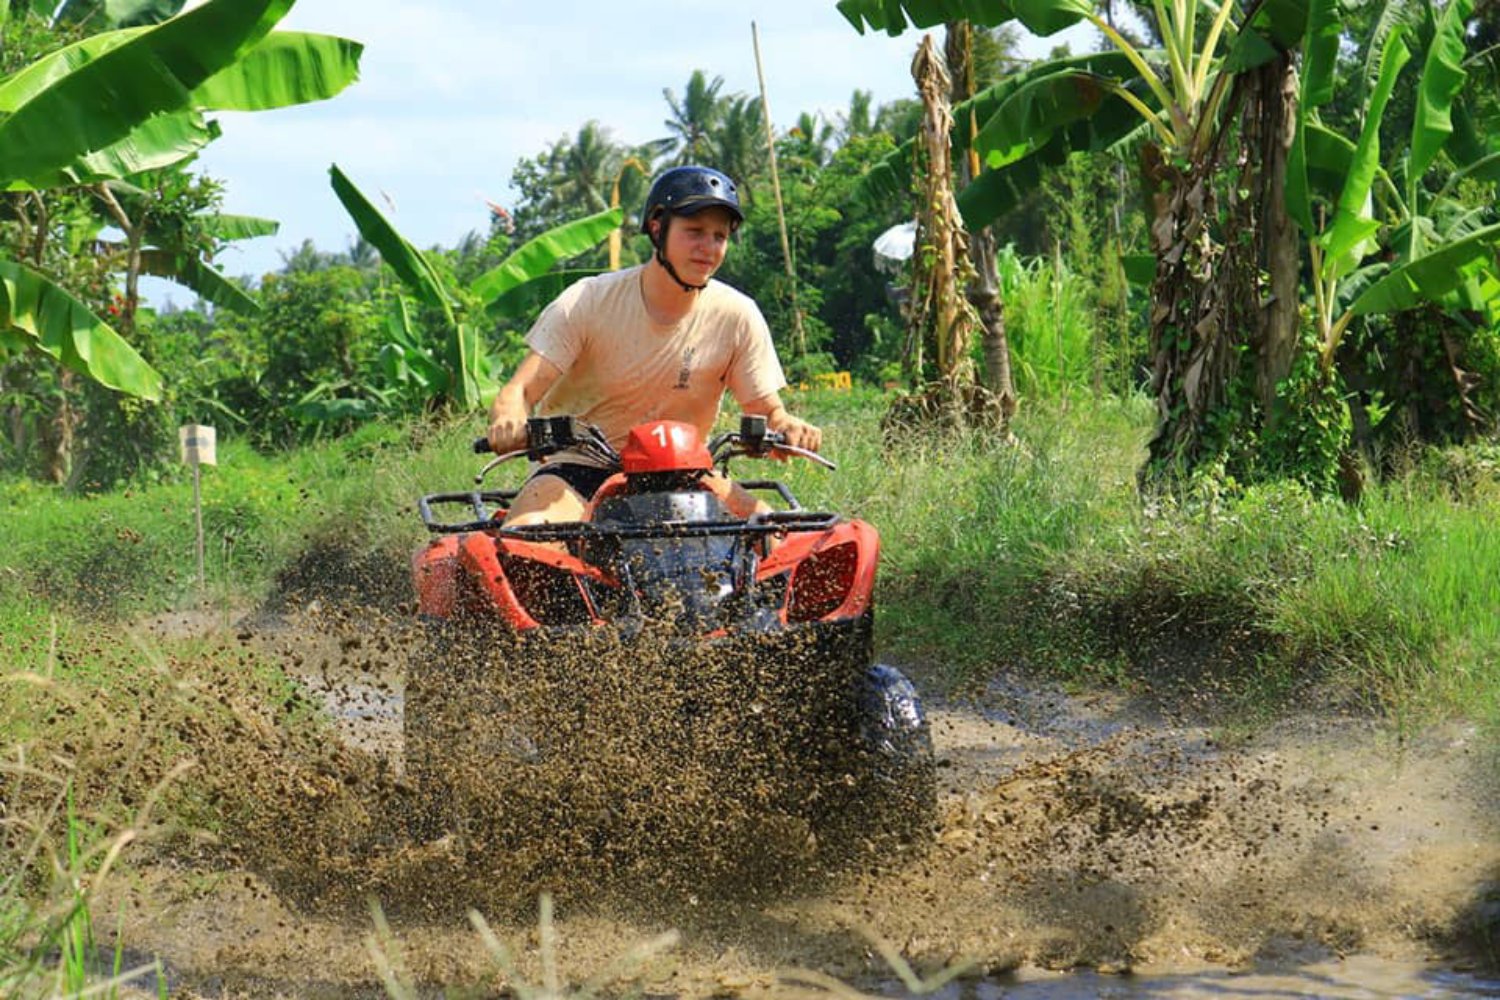 Bali Atv Quad Bike Adventure on Rice Fields and Forest Route